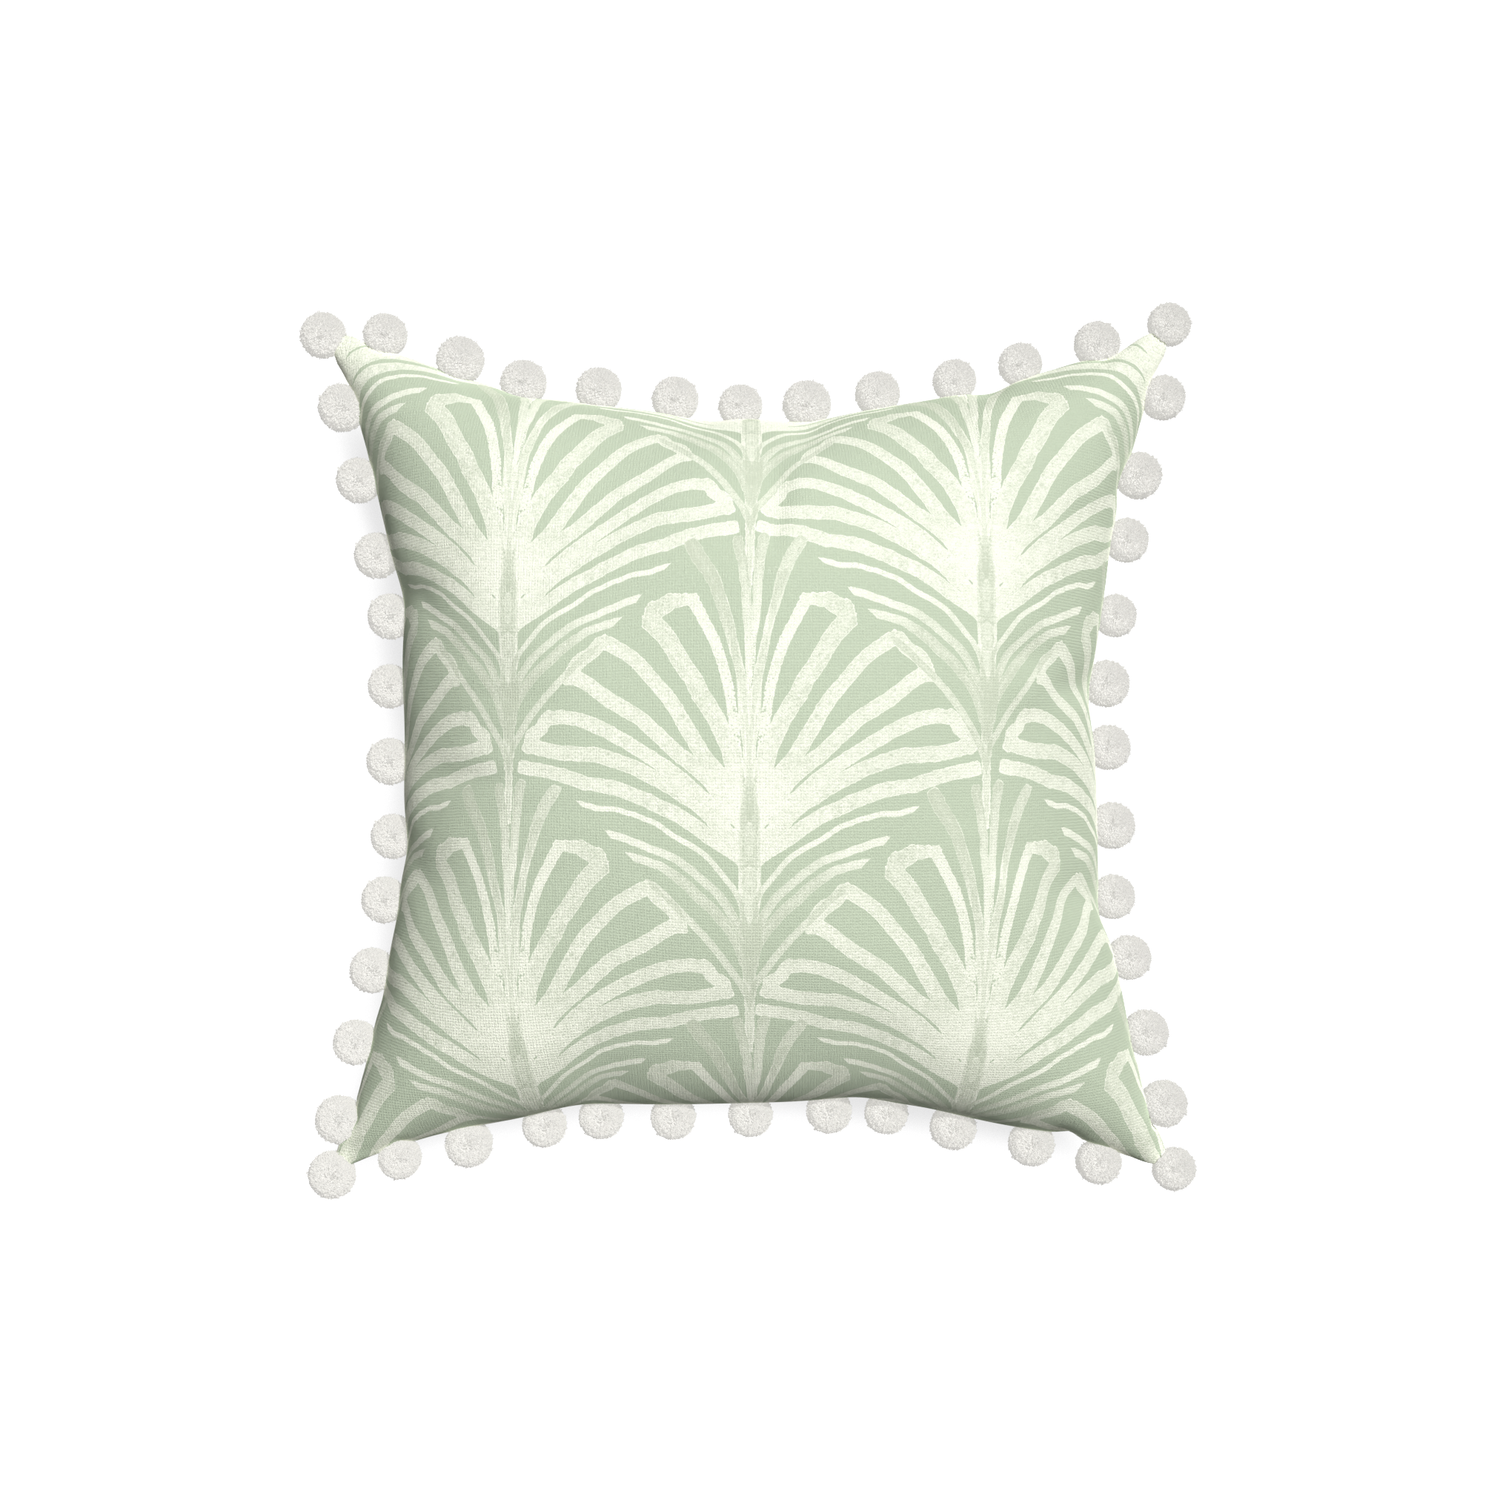 18-square suzy sage custom sage green palmpillow with snow pom pom on white background